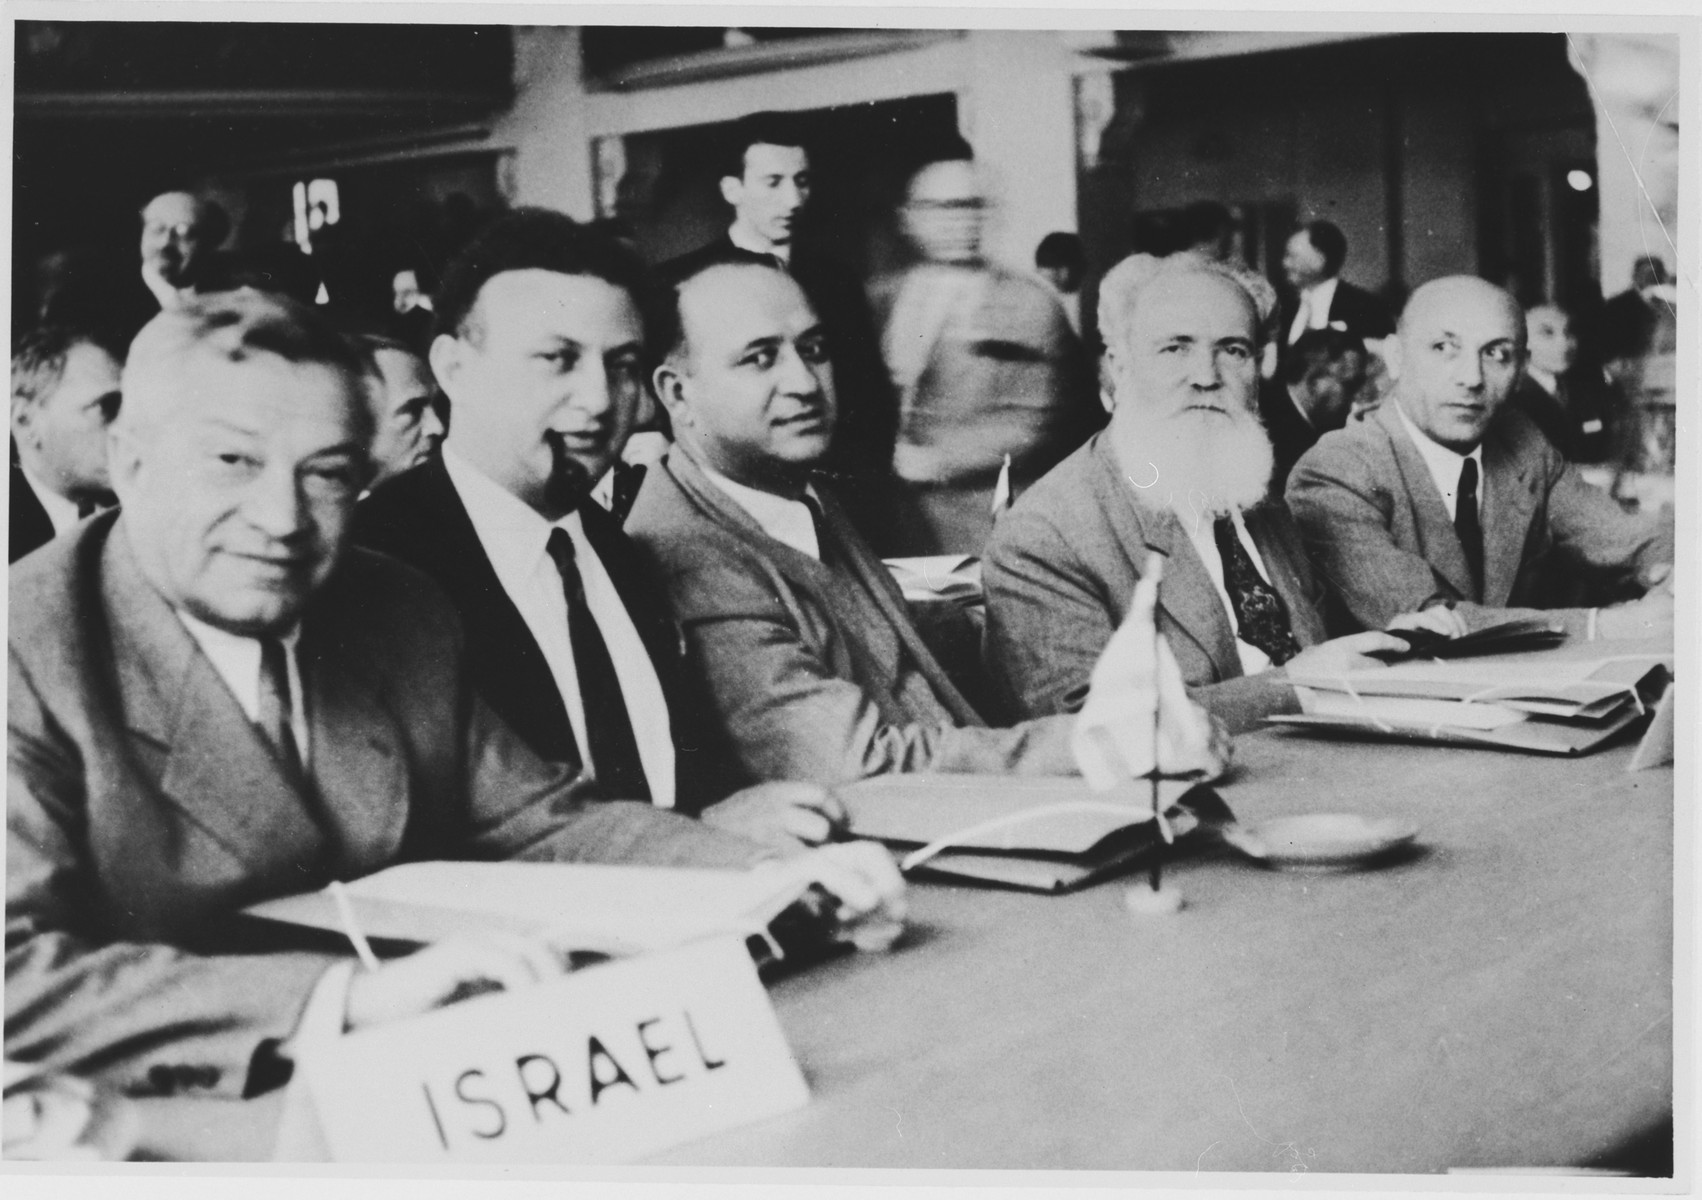 Members of the Israeli delegation to the World Jewish Congress meeting in Montreux, Switzerland.

Among those pictured is Jacob Zerubavel (second from the right).